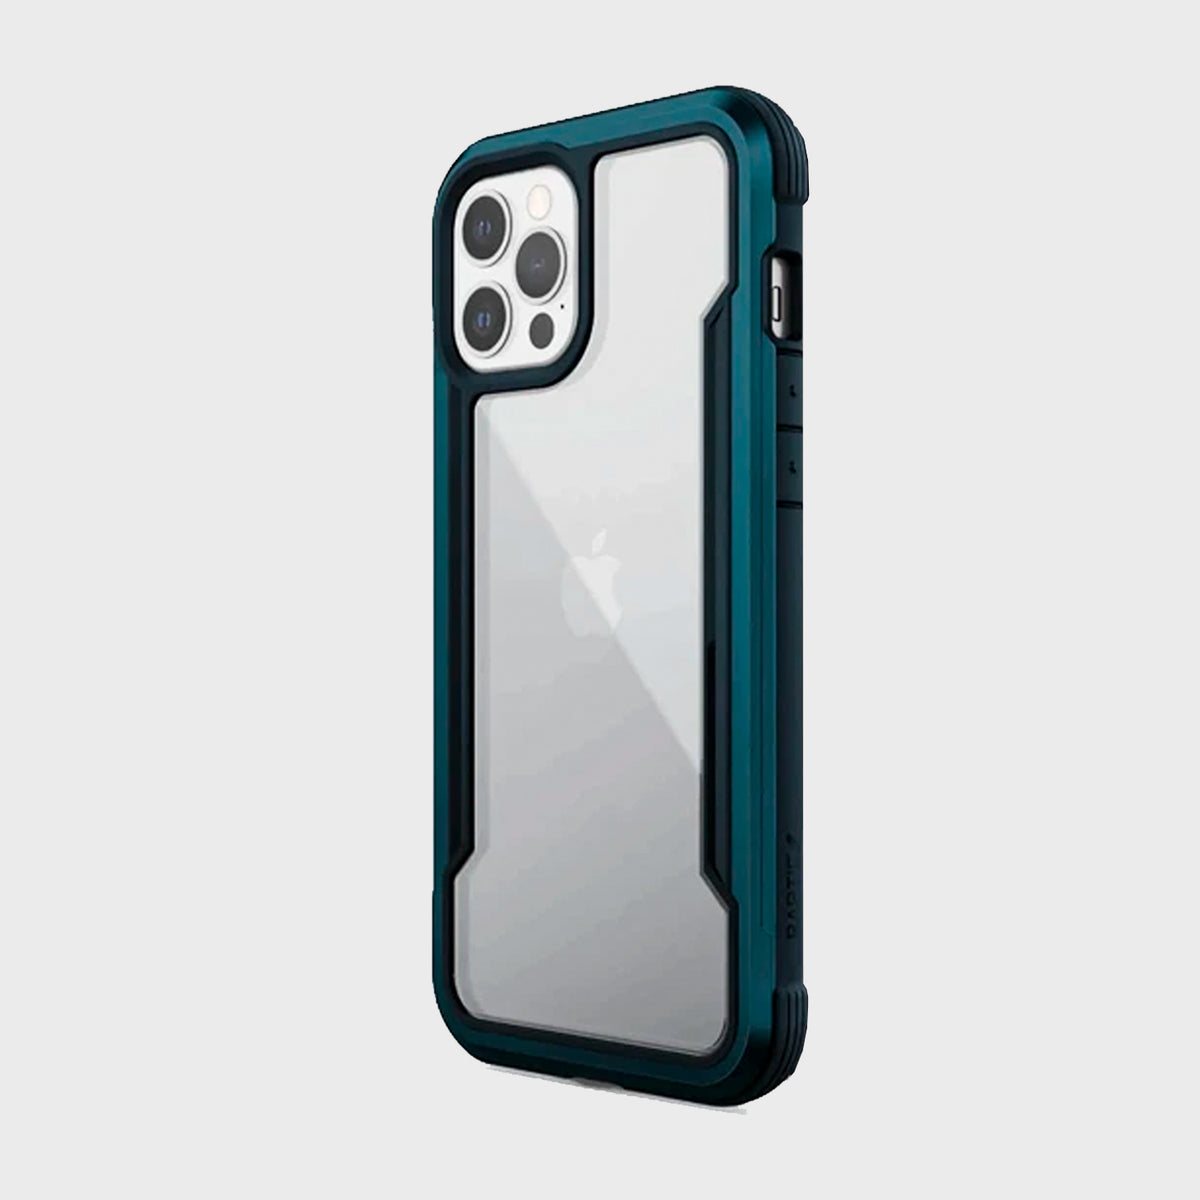 The iPhone 12 Pro Max case, known as the Raptic Shield case, is shown in teal.